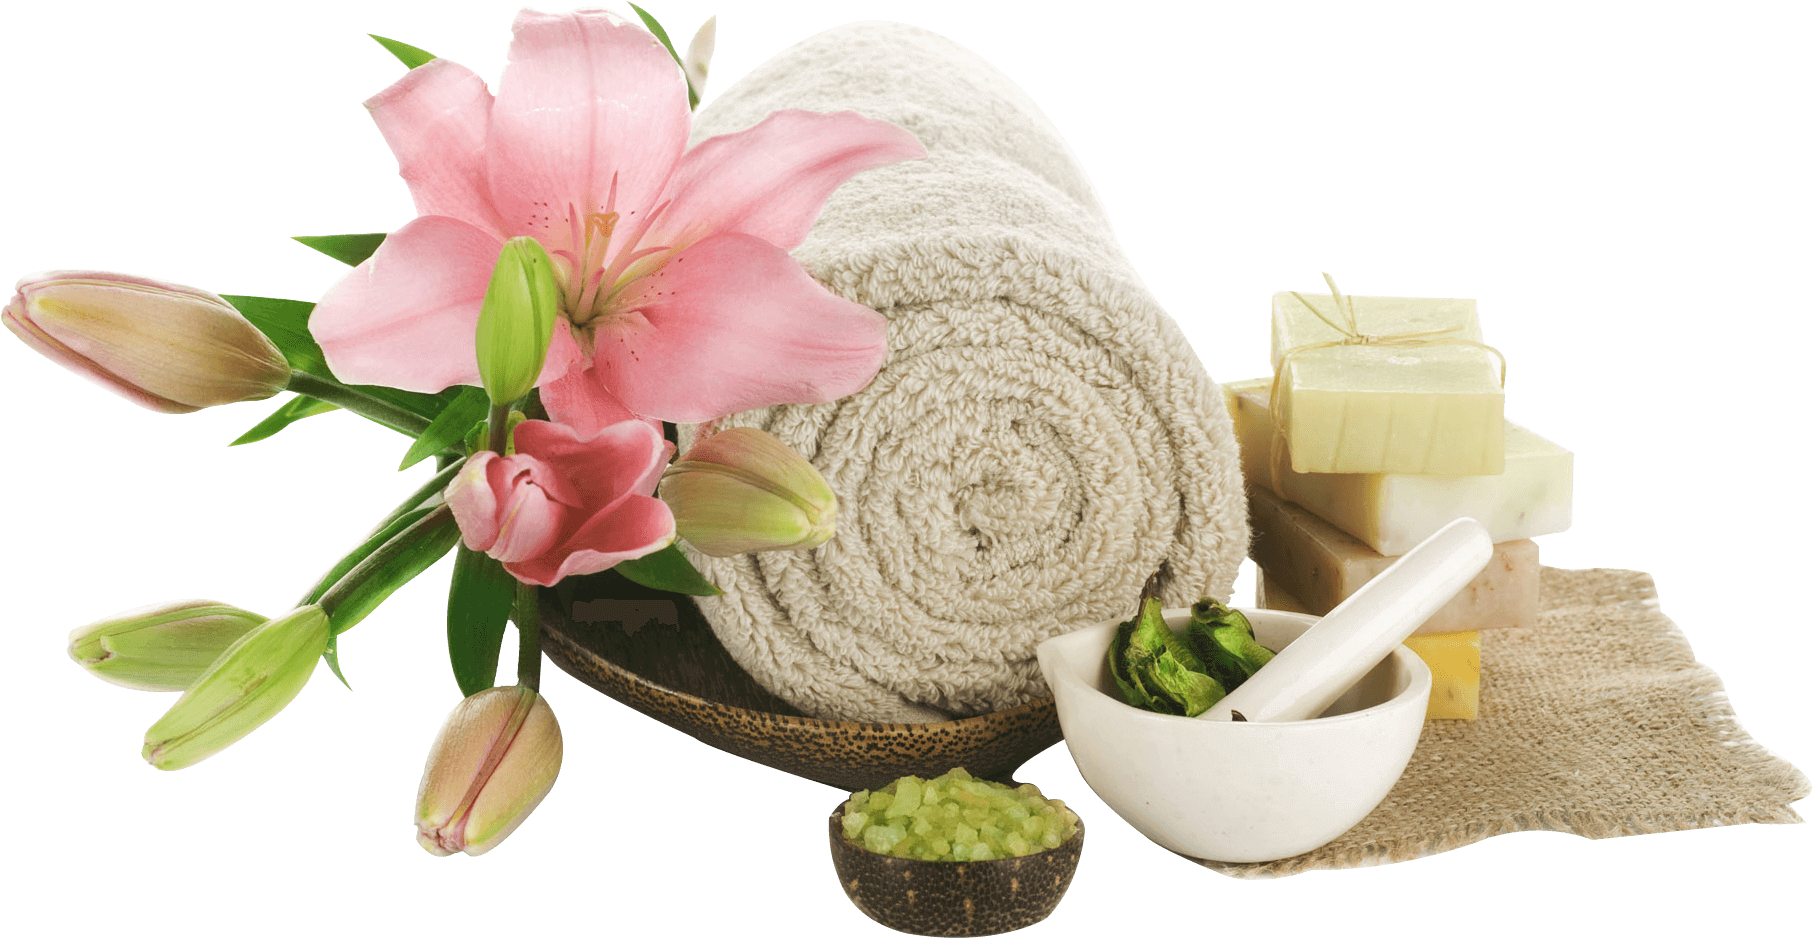 Zhen Day Spa Beauty | Massage and Day Spa in San Antonio